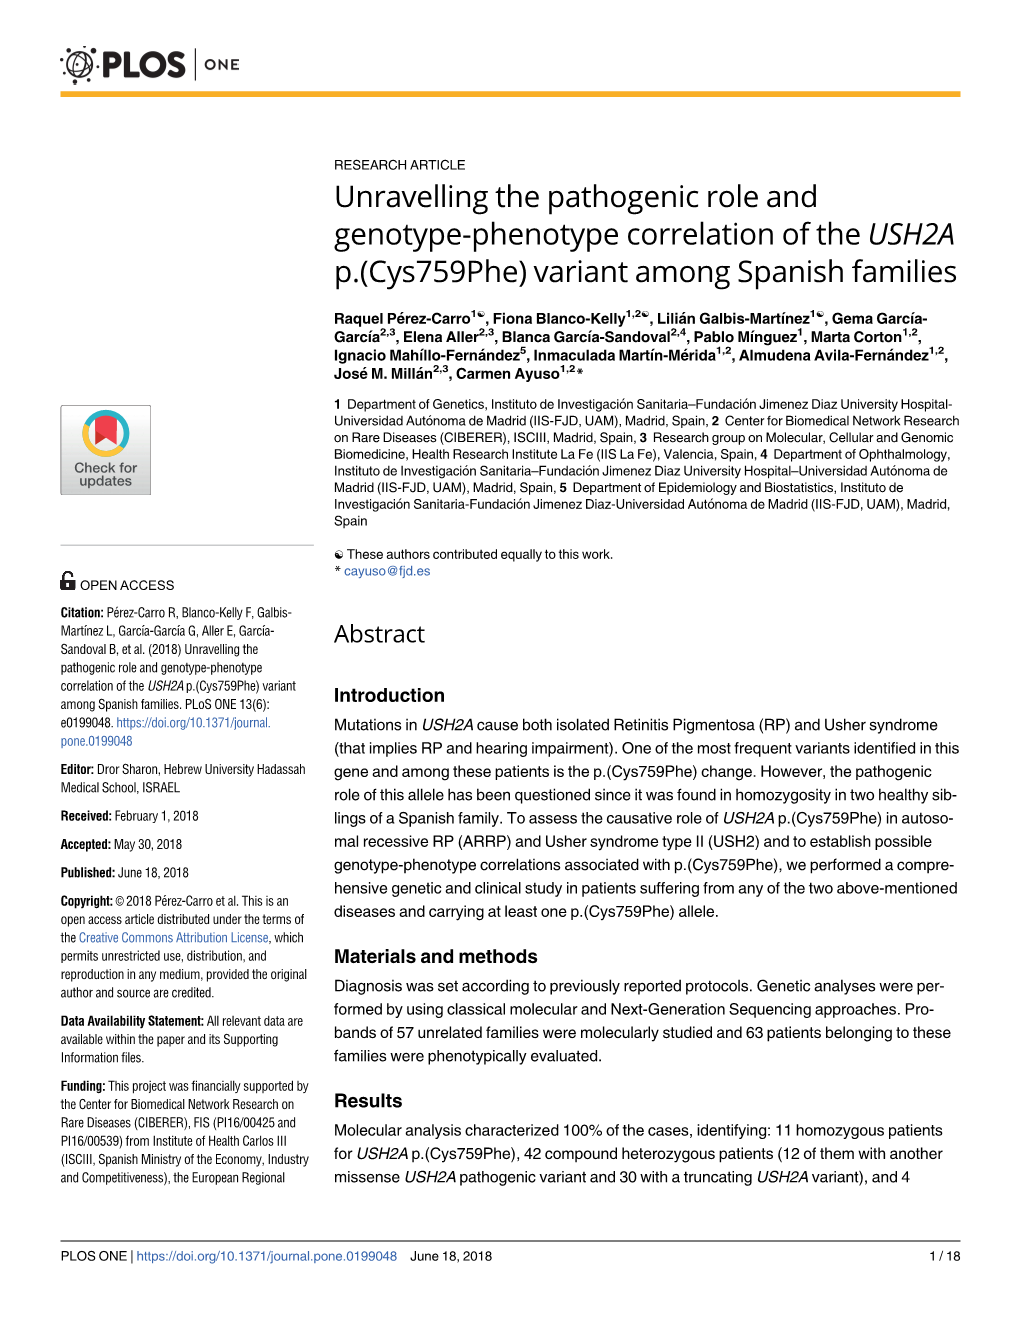 Unravelling the Pathogenic Role and Genotype-Phenotype Correlation of the USH2A P.(Cys759phe) Variant Among Spanish Families